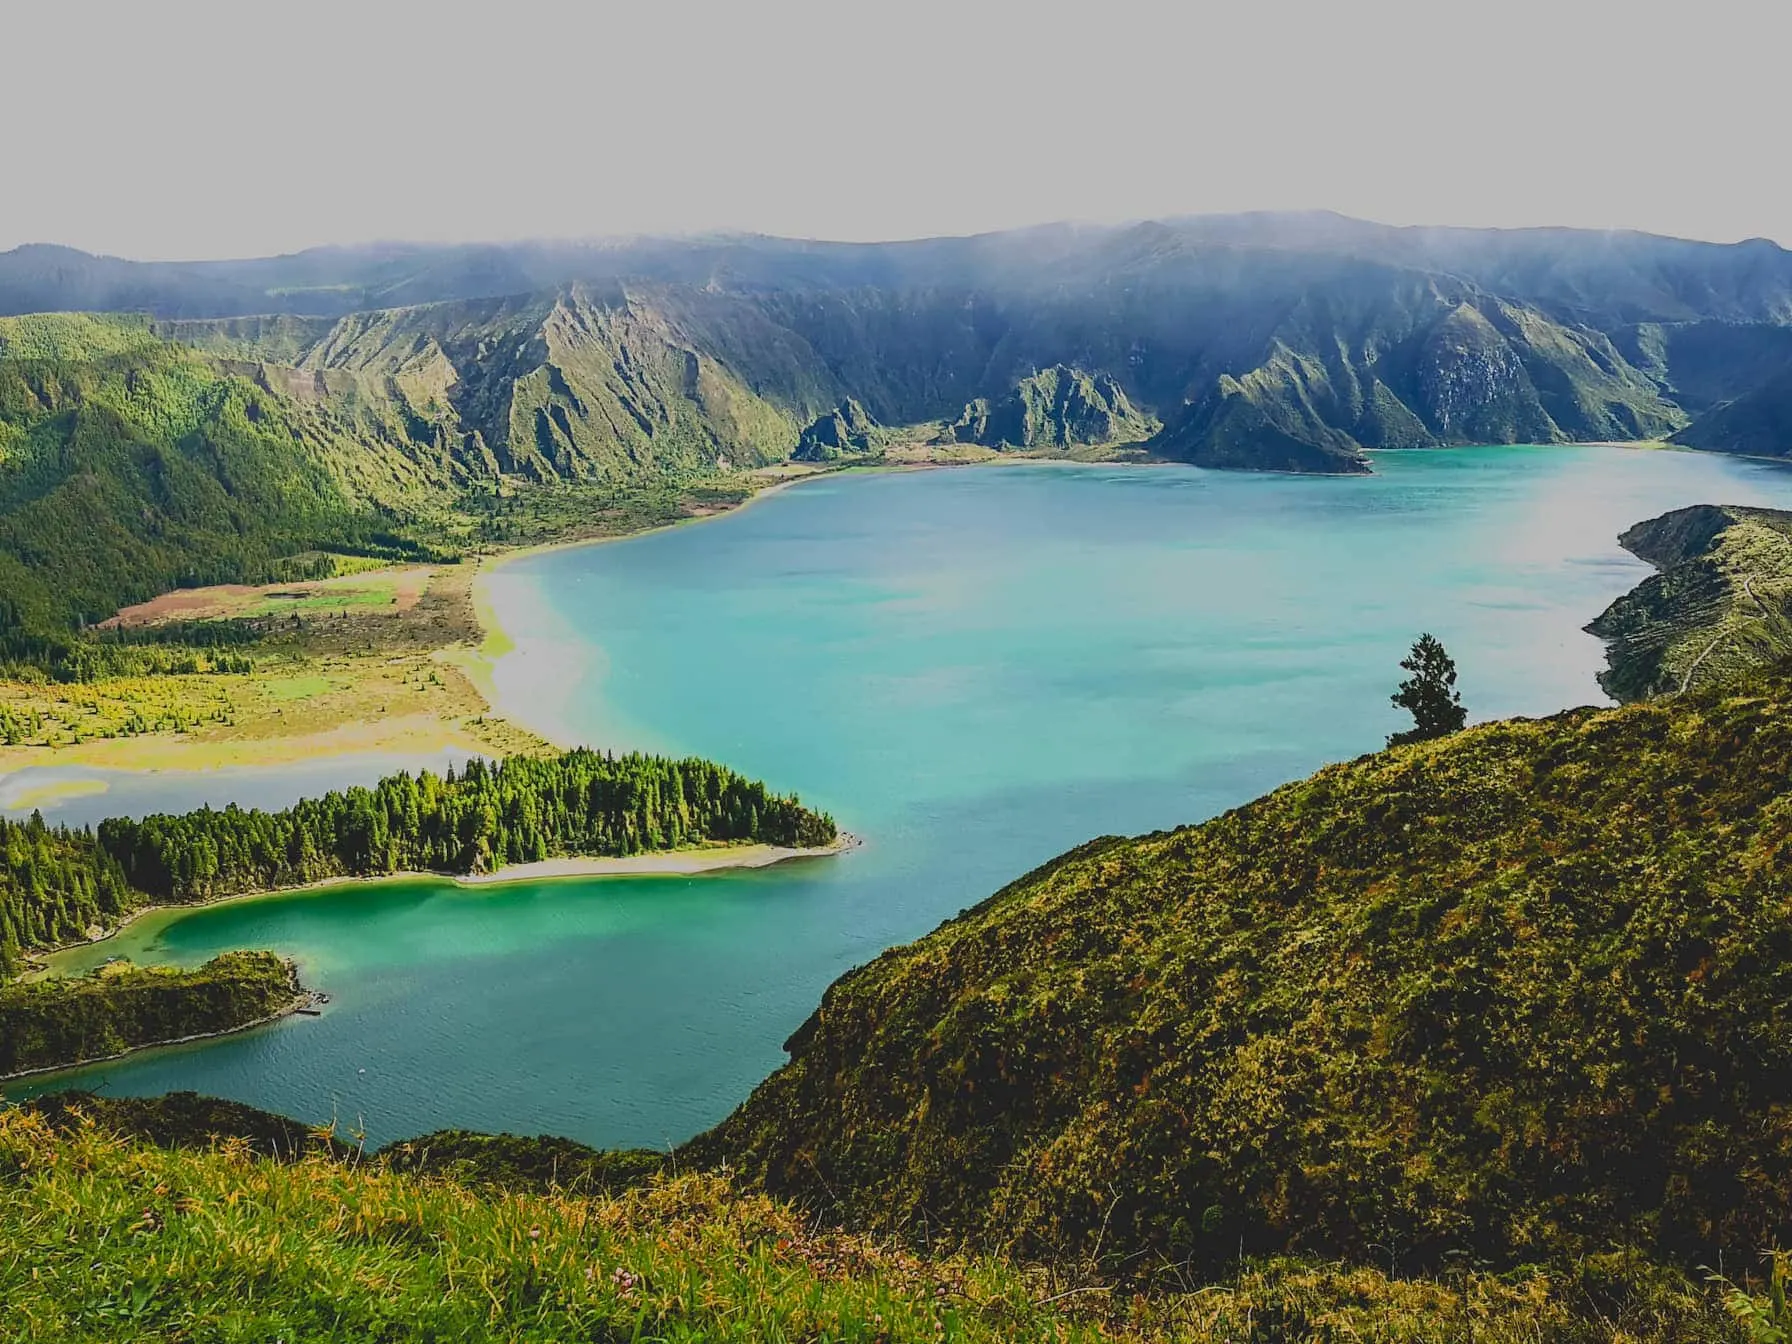 20 Unmissable Things To Do On São Miguel Island, Azores - Sao Miguel Lagoa do Fogo -The Fire Lake